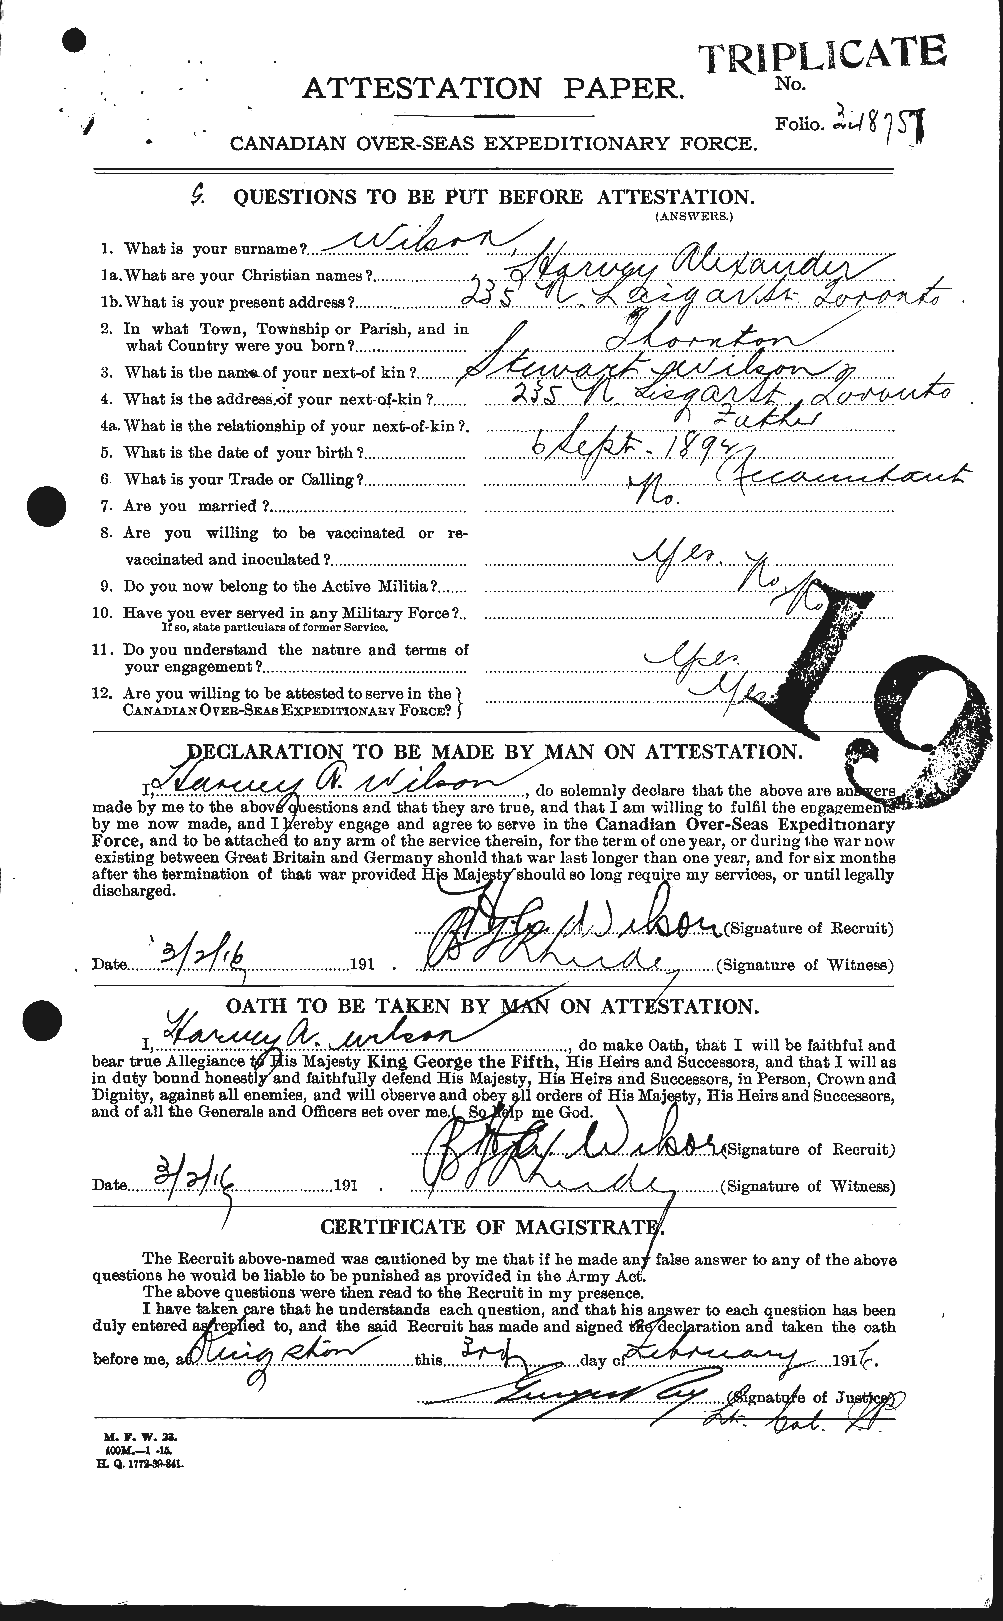 Personnel Records of the First World War - CEF 679480a